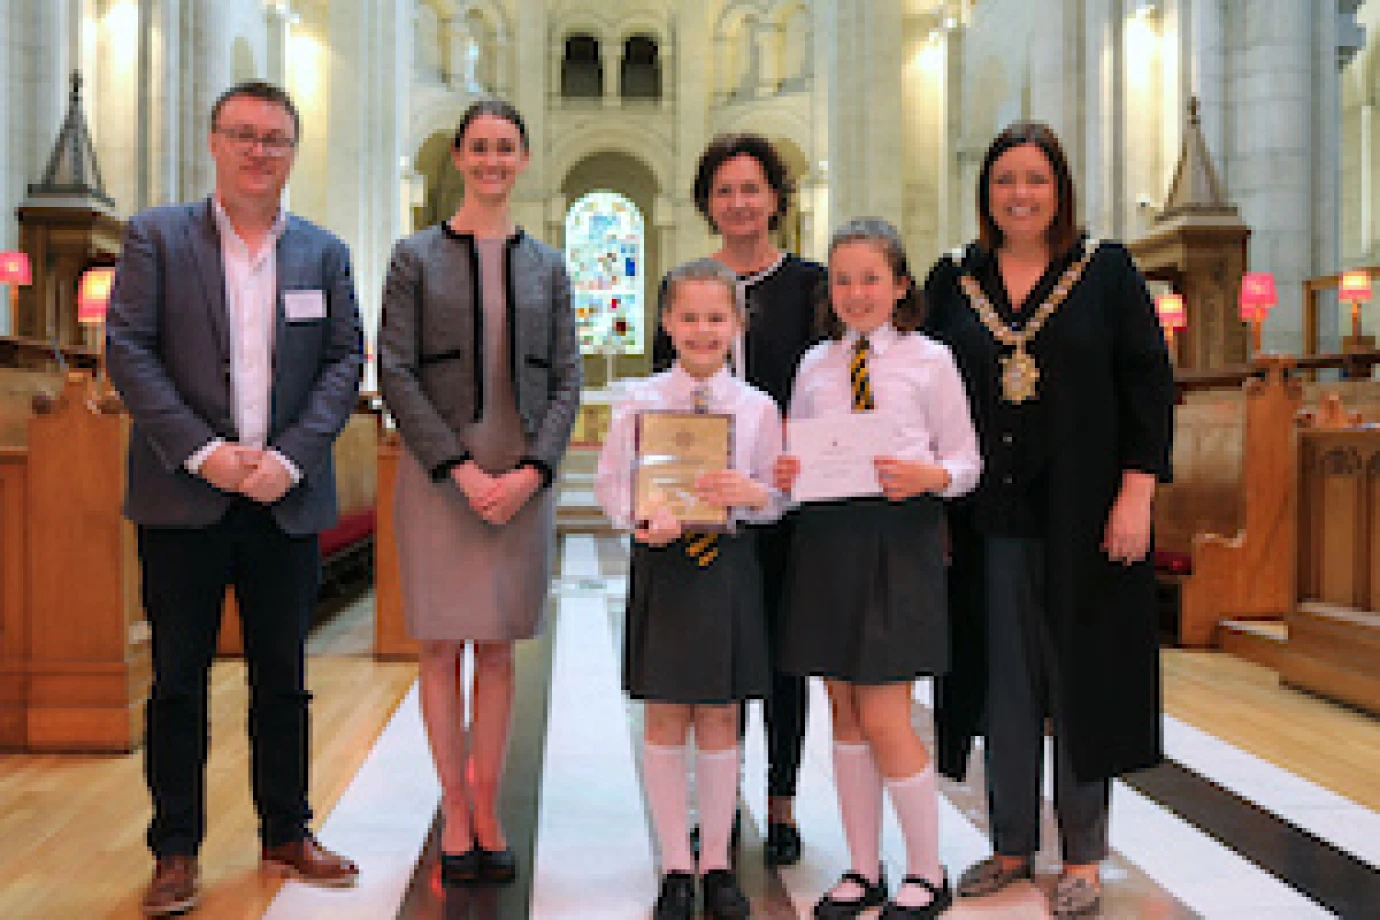 School Choirs competition a ‘real celebration of music’